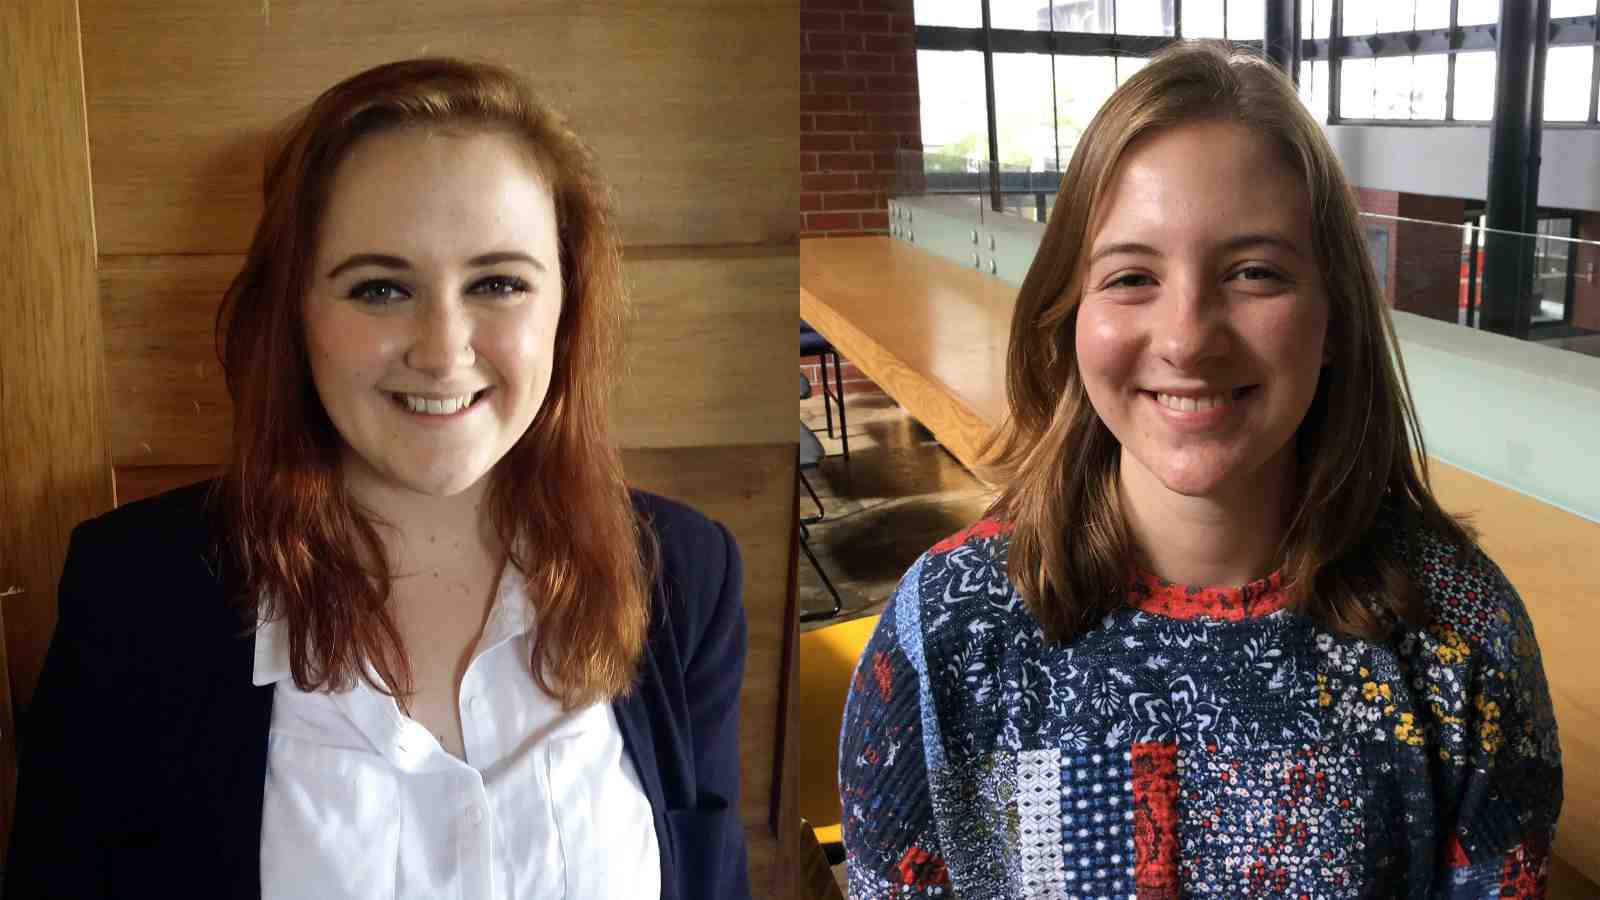 Victoria University students Kate McDonald and Stella Ivory are attending the Women Deliver Global Conference 2016 in Copenhagen this May.